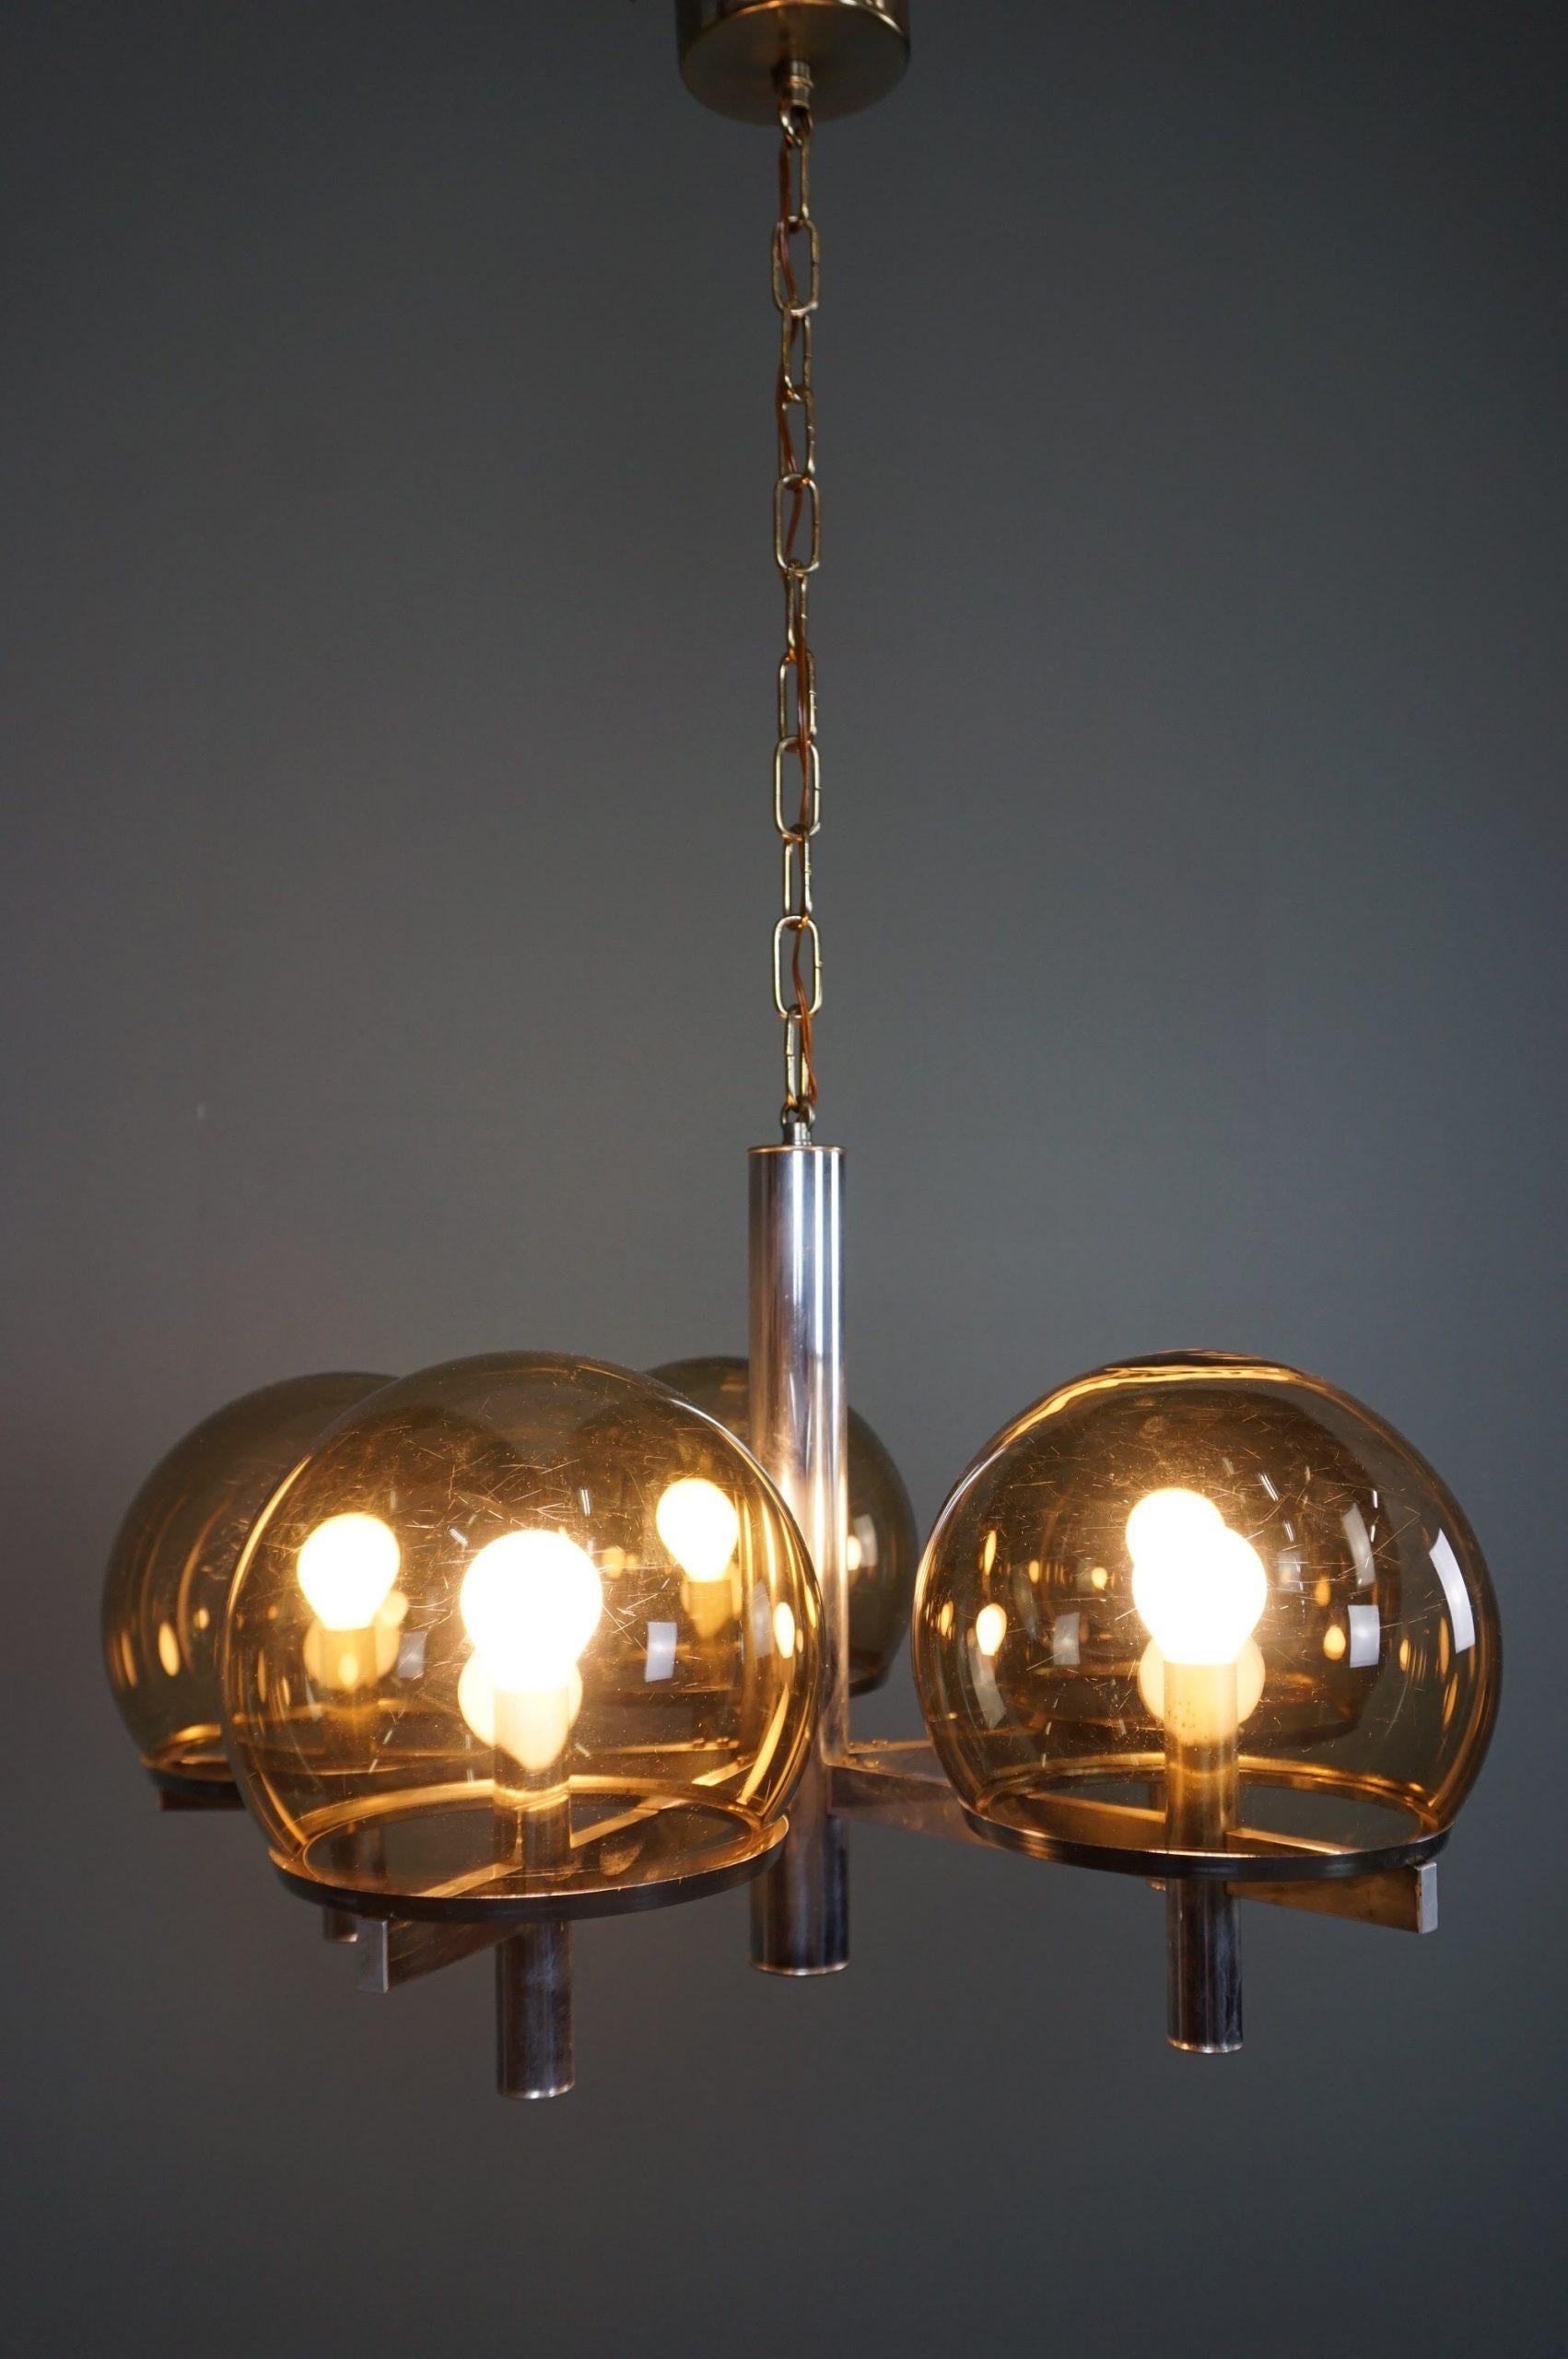 Offered is this striking hanging lamp designed by Gaetano Sciolari.

This timeless chandelier has a beautiful appearance due to the combination of the chrome frame with the smoked glass balls. Gaetano Sciolari lamps always impress us with their